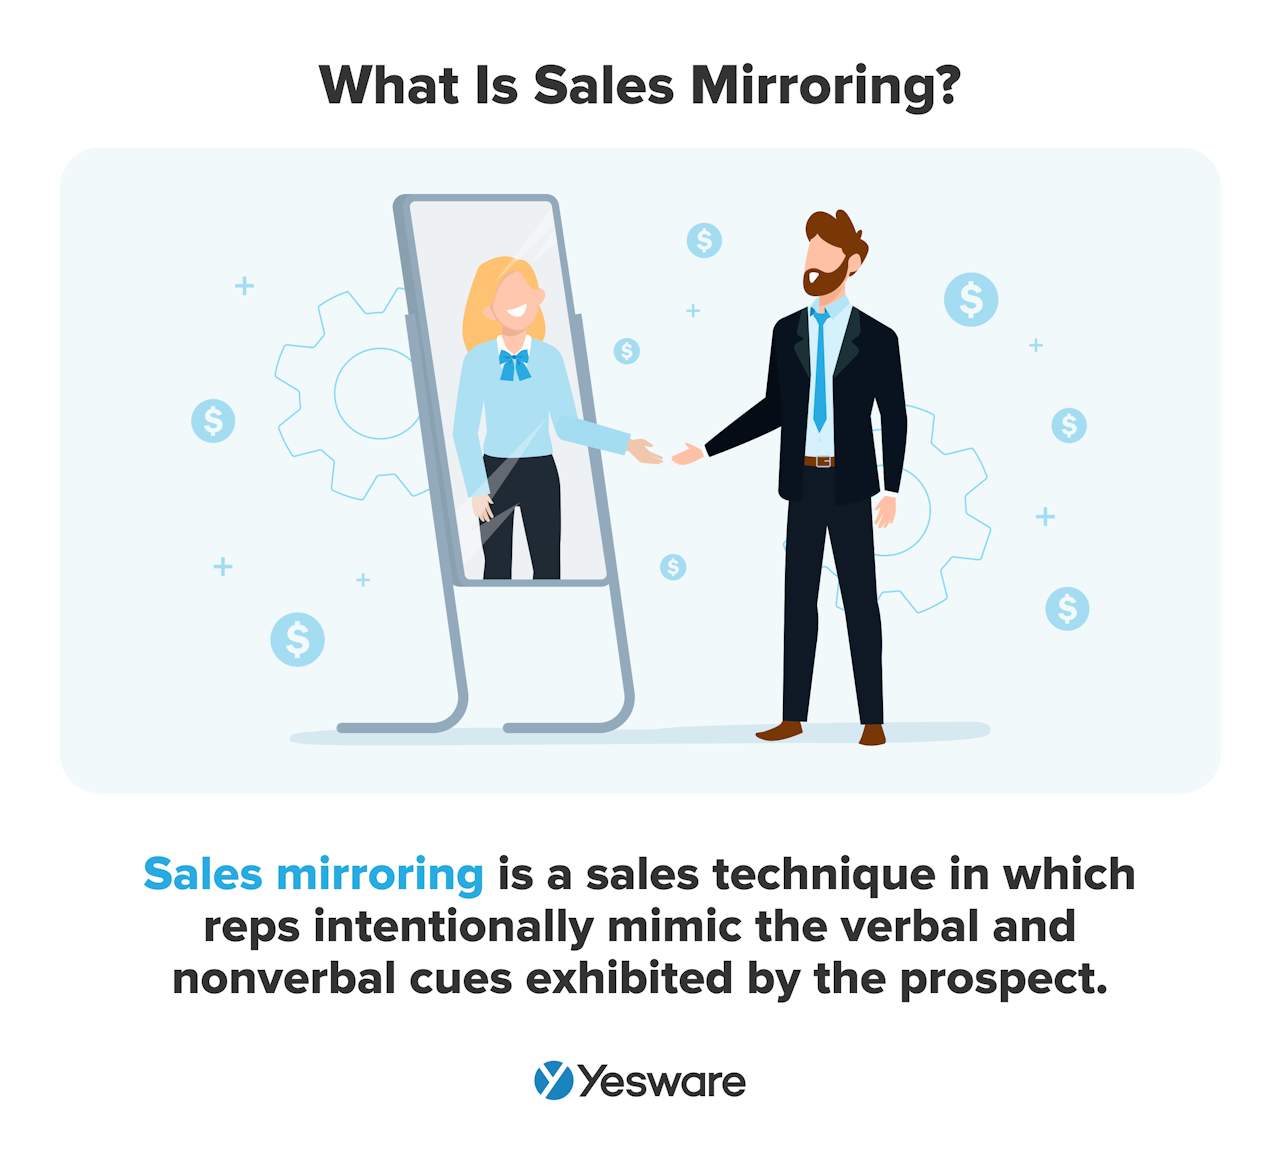 what is sales mirroring?